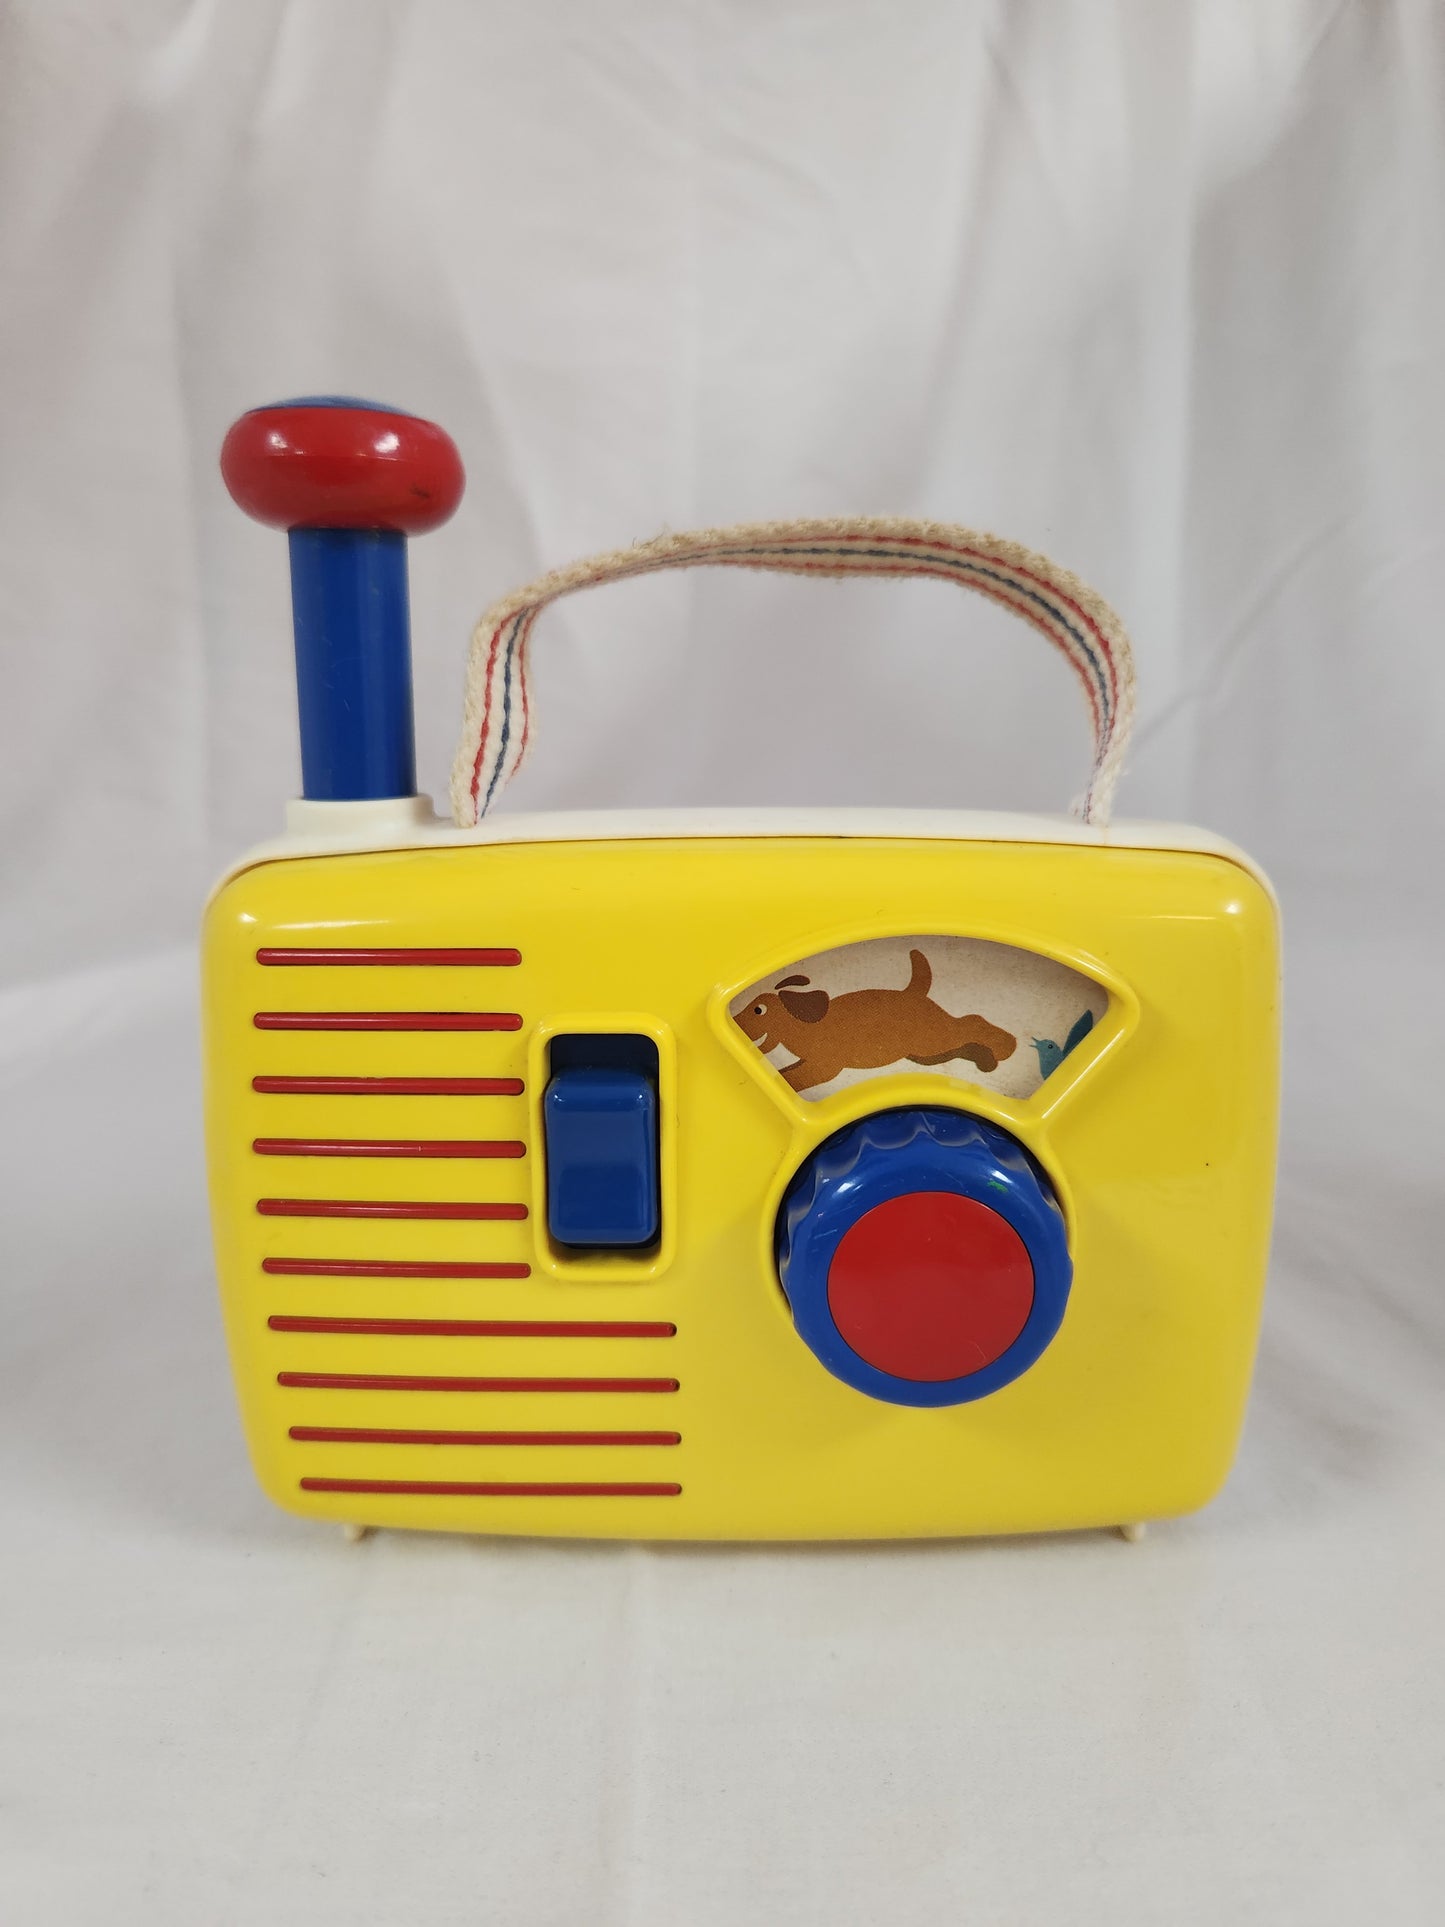 RETRO - Ambi Toys Yellow Radio Playing "How much is that doggie in the window"